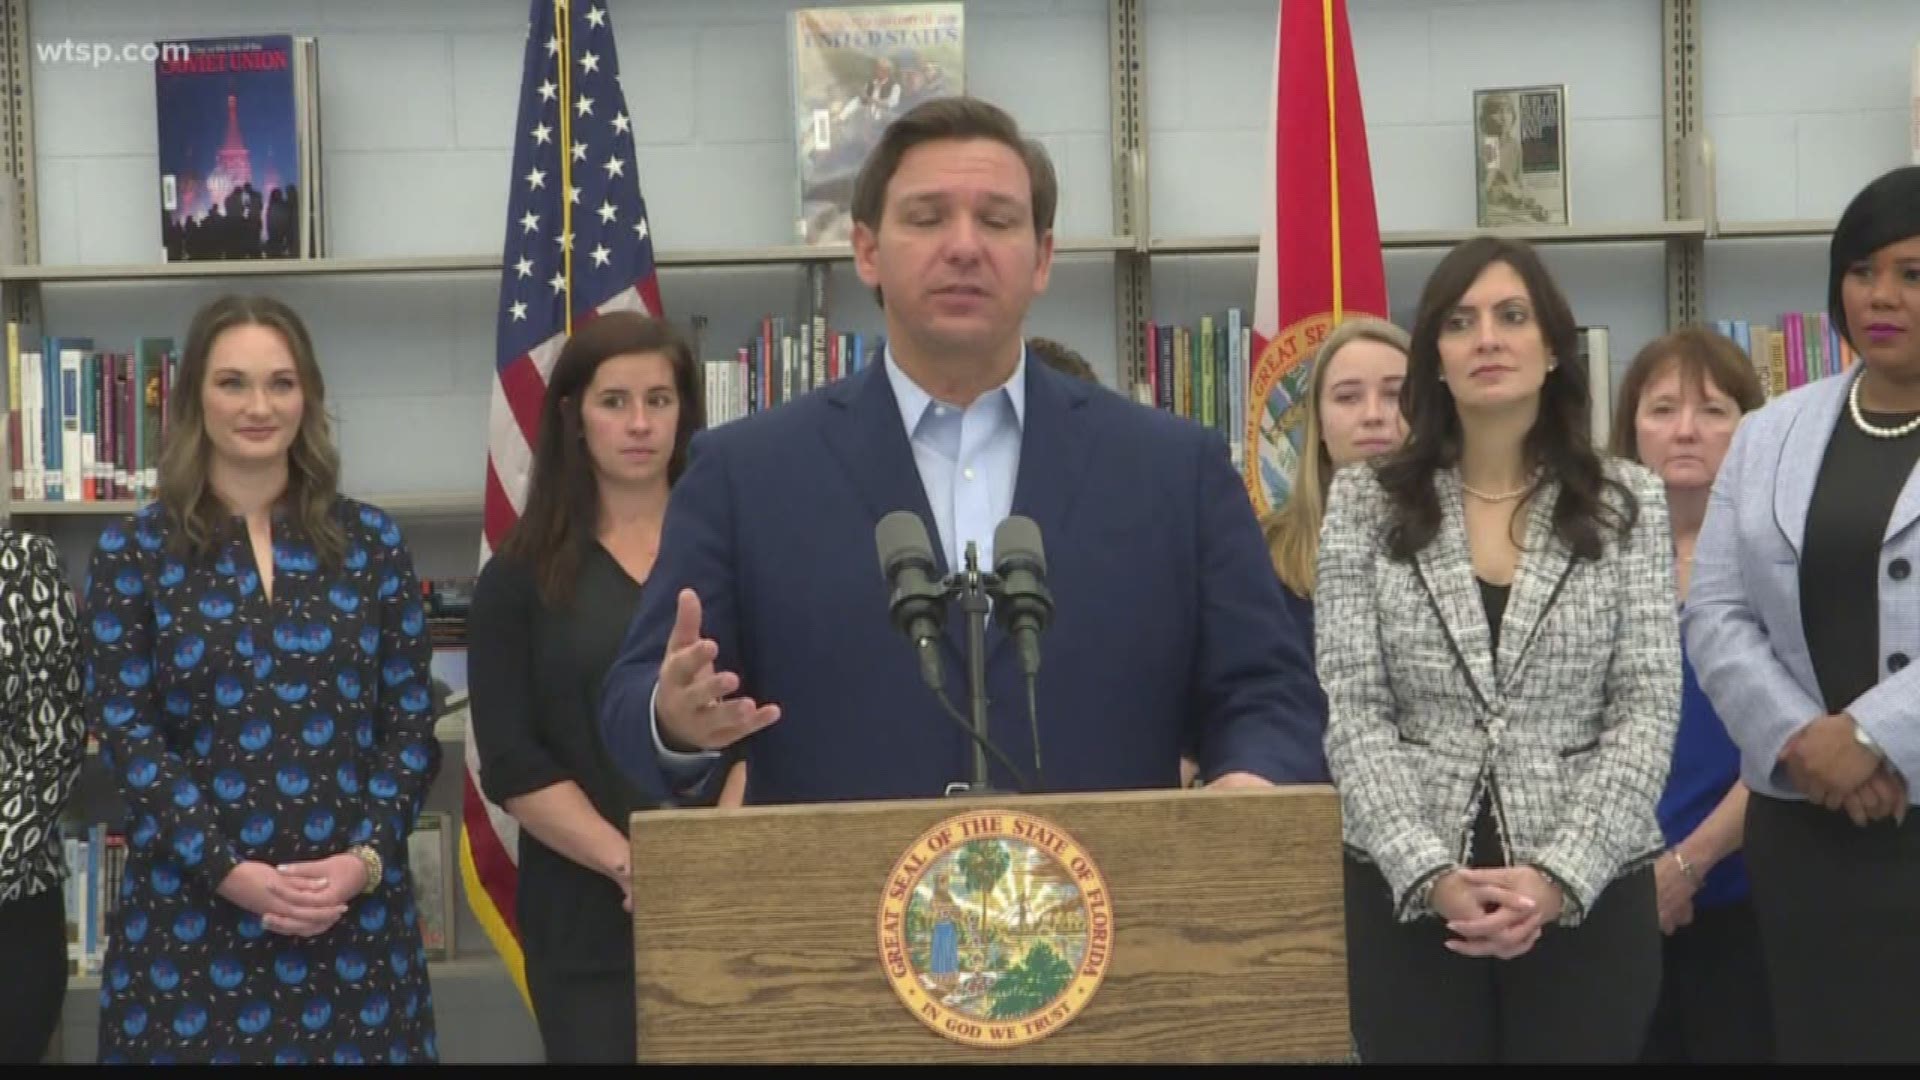 Speaking Thursday in Seffner, the governor announced a plan to set aside more than $422 million in the state budget. It's money he says will be used to pay teachers larger bonuses.